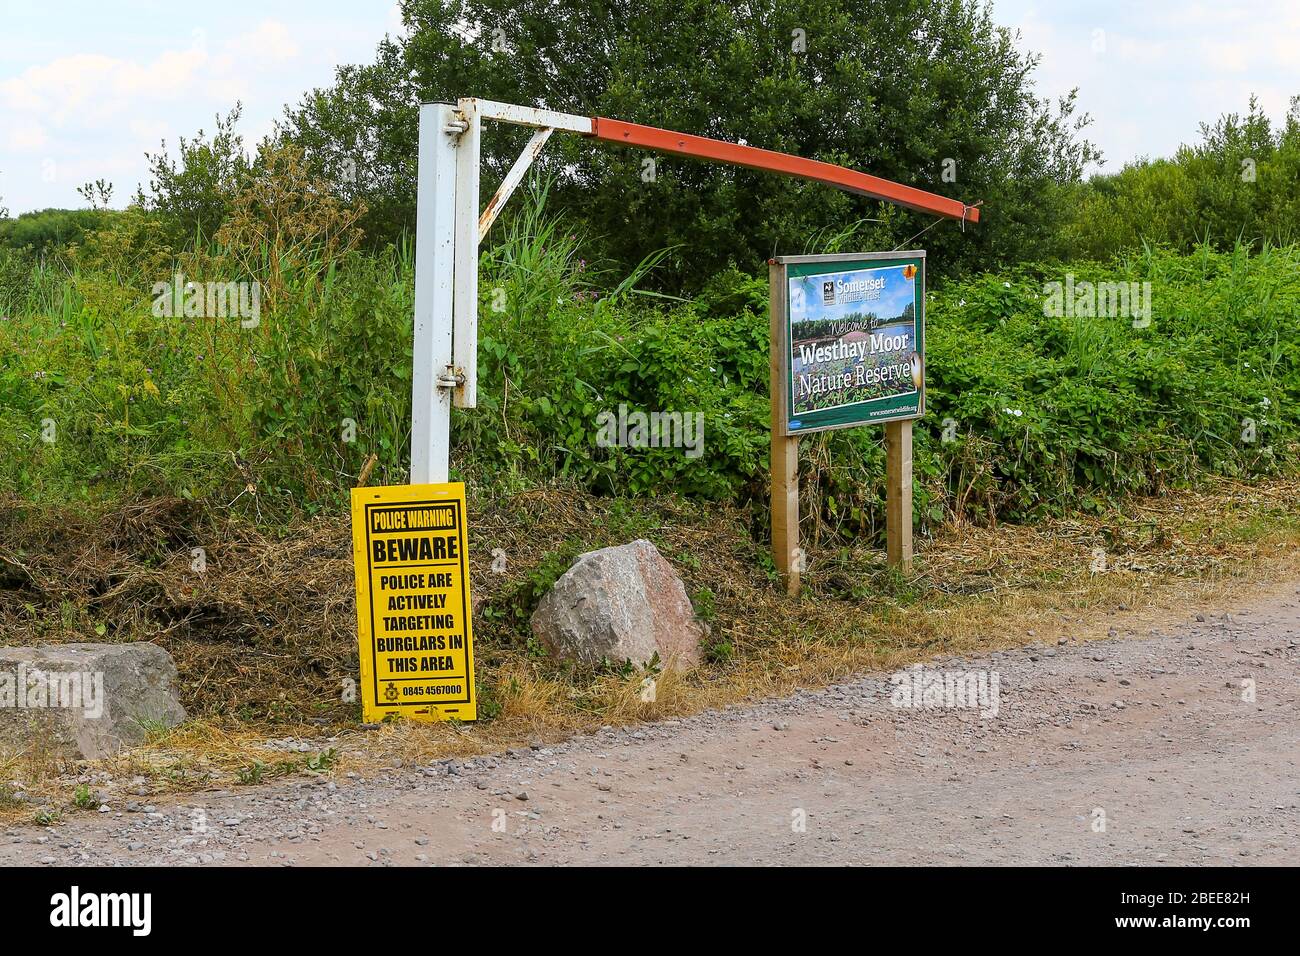 A sign saying police are actively targeting burglars in the area at Westhay Moor Nature Reserve, Somerset, England, UK Stock Photo